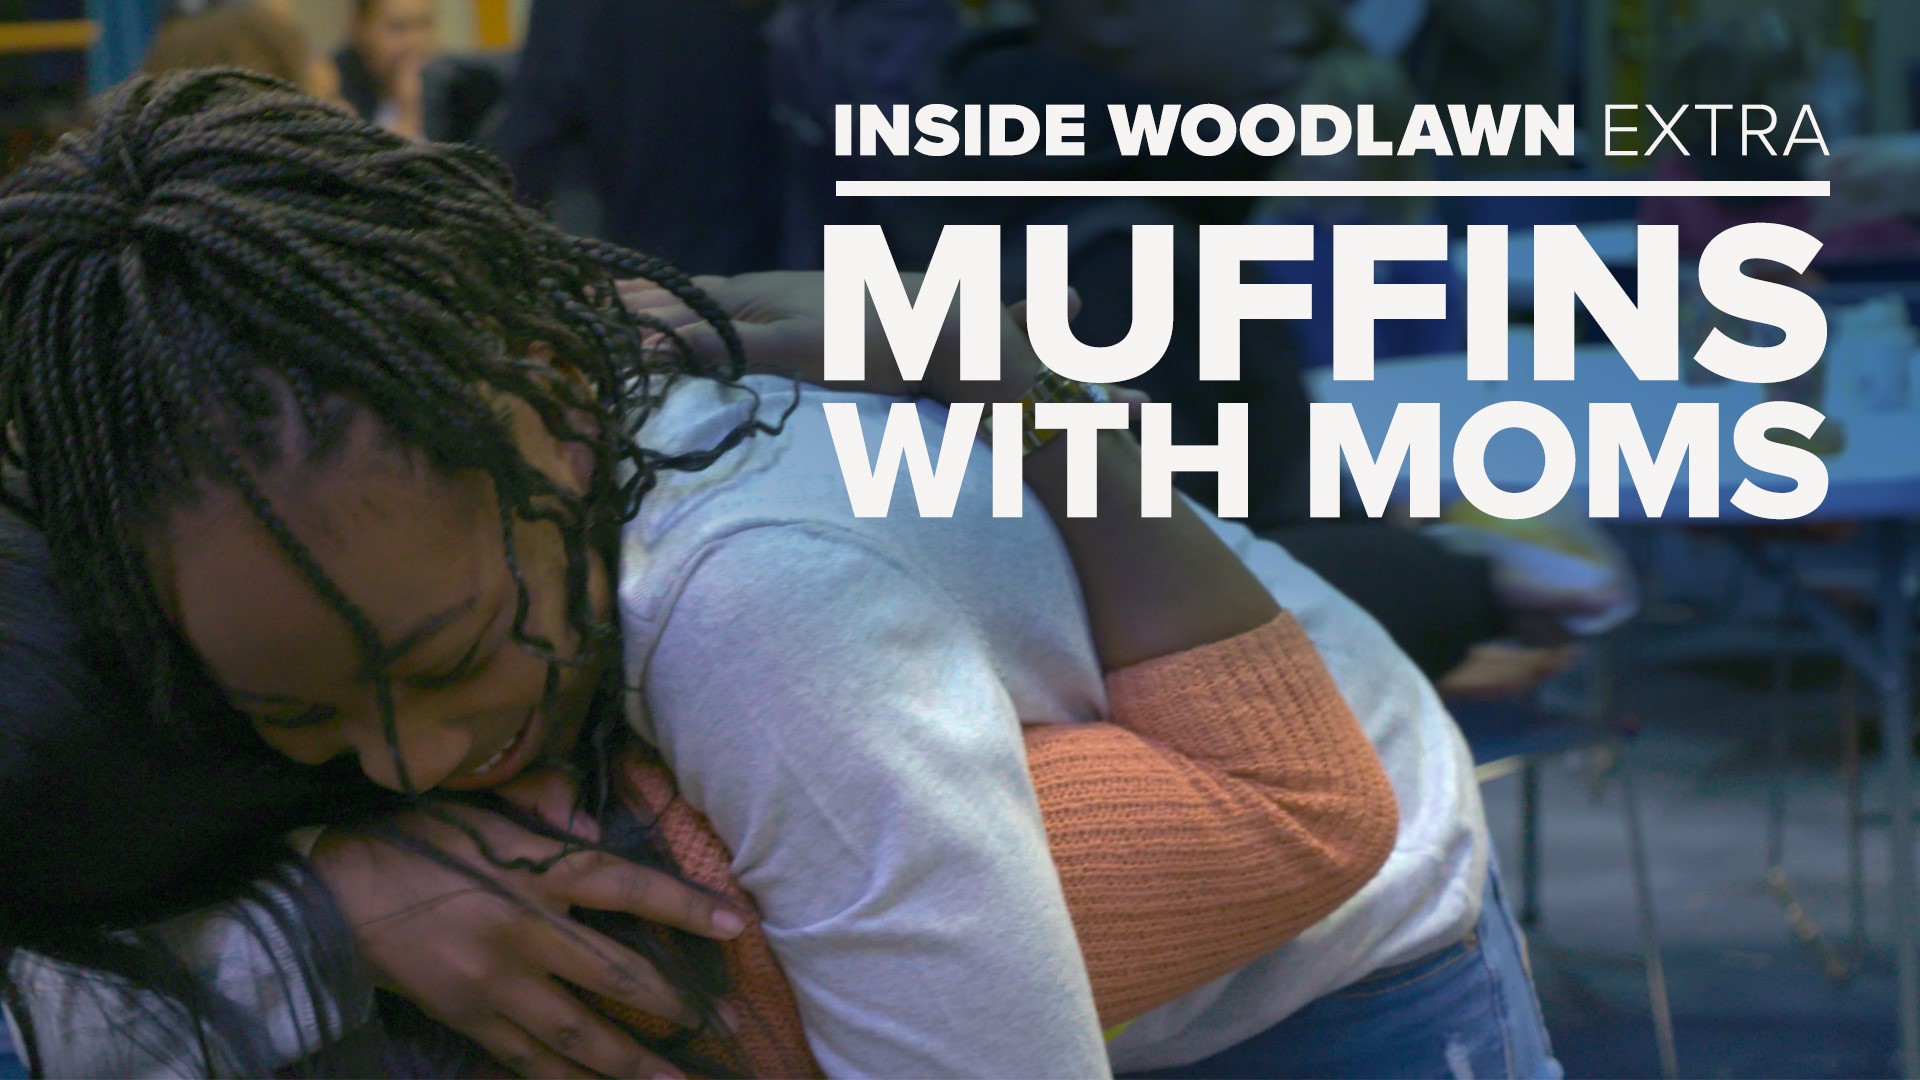 More than a hundred Woodlawn Elementary School students in NE Portland recently enjoyed a morning with their moms and mother figures for the annual Muffins with Moms